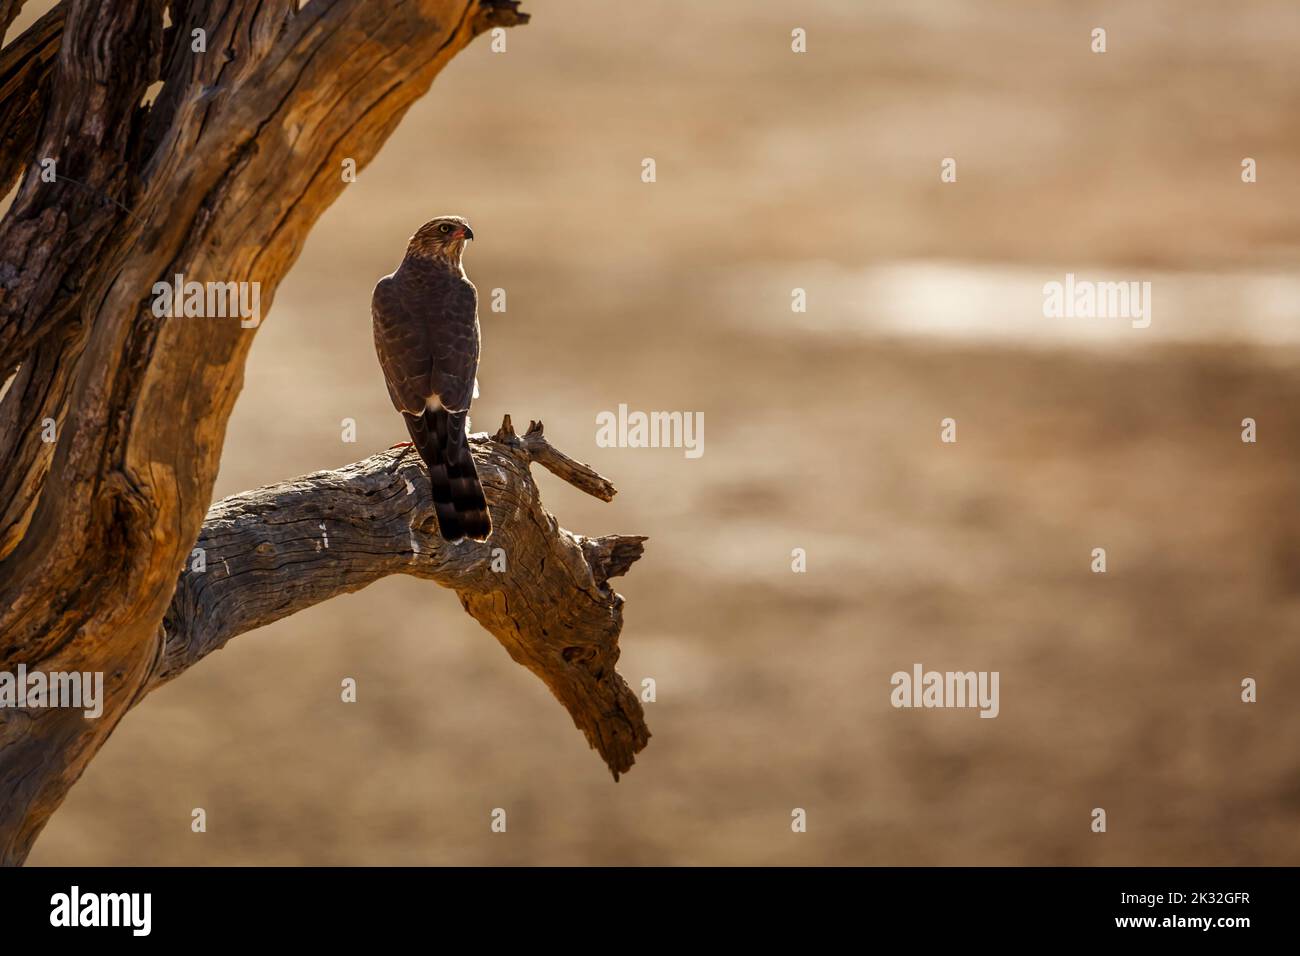 Gabar Goshawk standing on branch rear view in Kgalagadi transfrontier park, South Africa; specie  Micronisus gabar family of Accipitridae Stock Photo